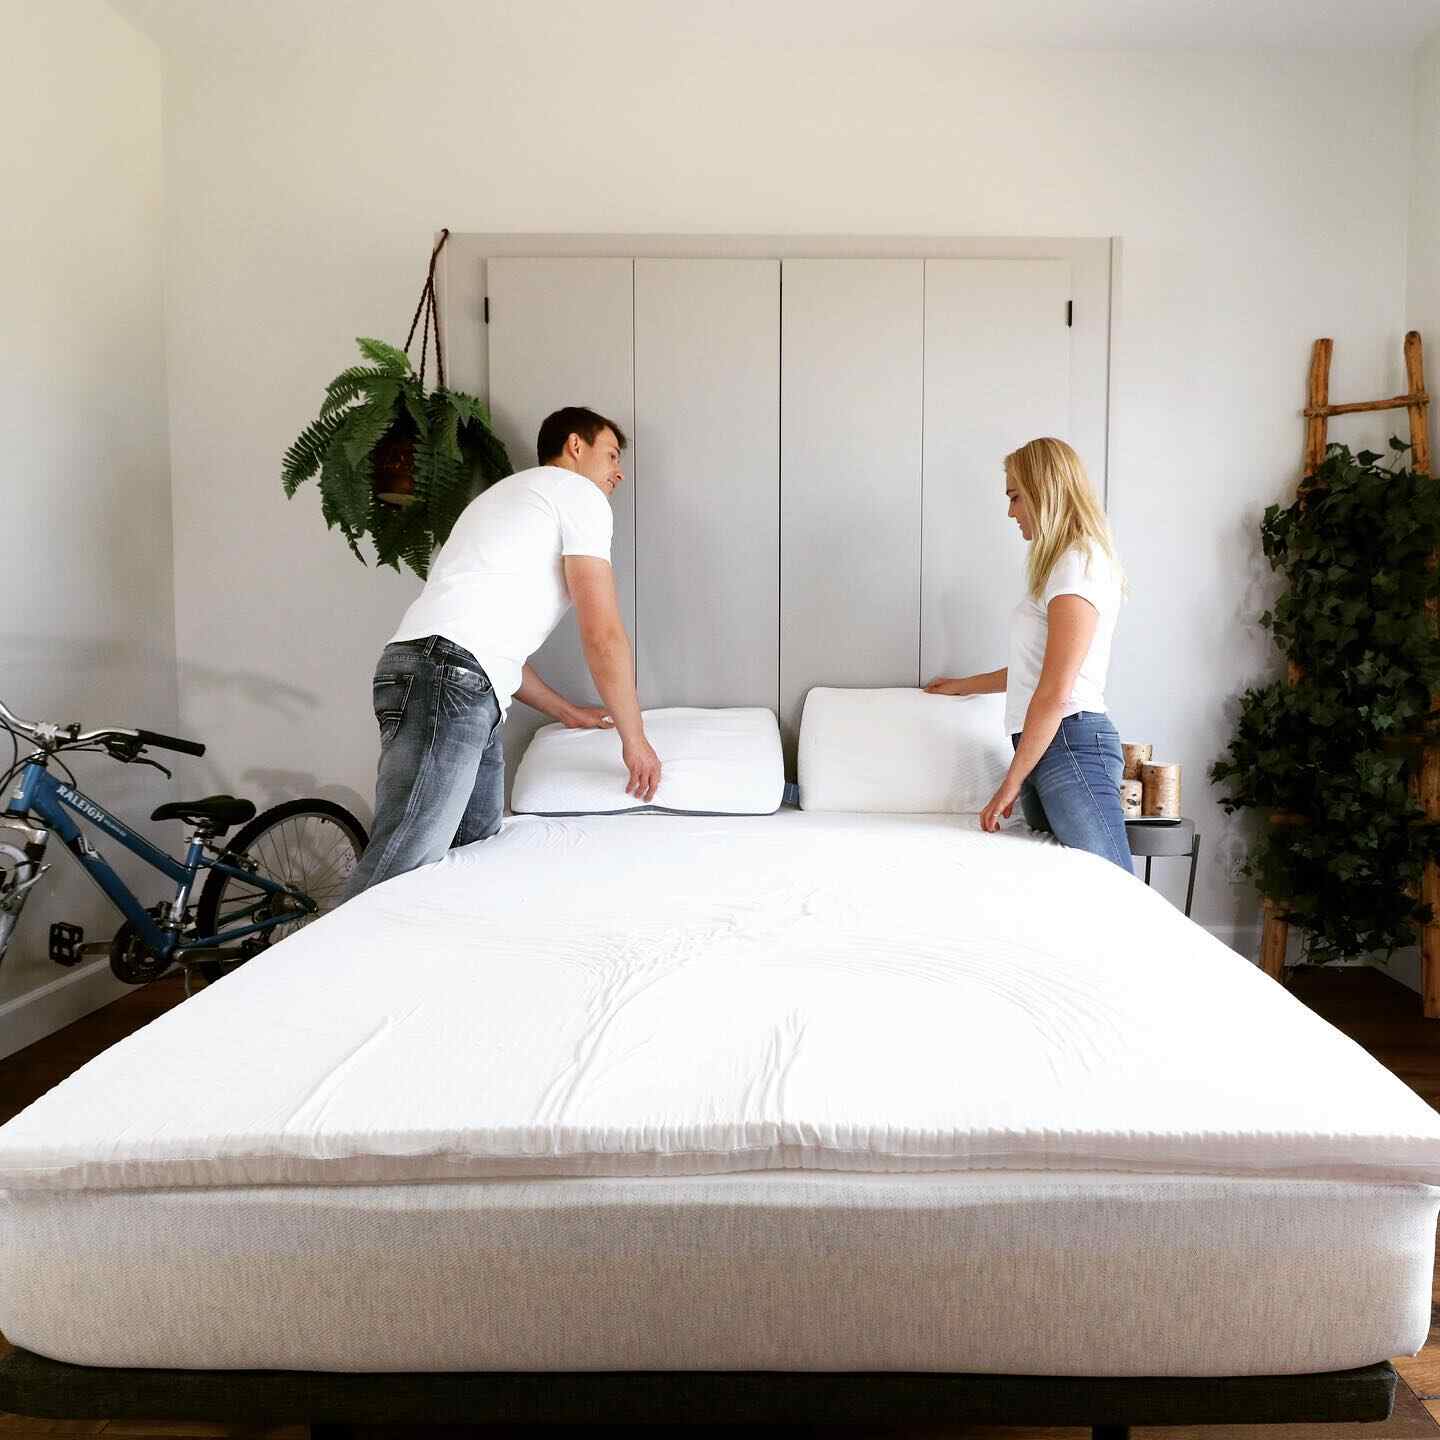 A man and a woman arrange the eco-friendly pillows on their eco-friendly mattress topper.